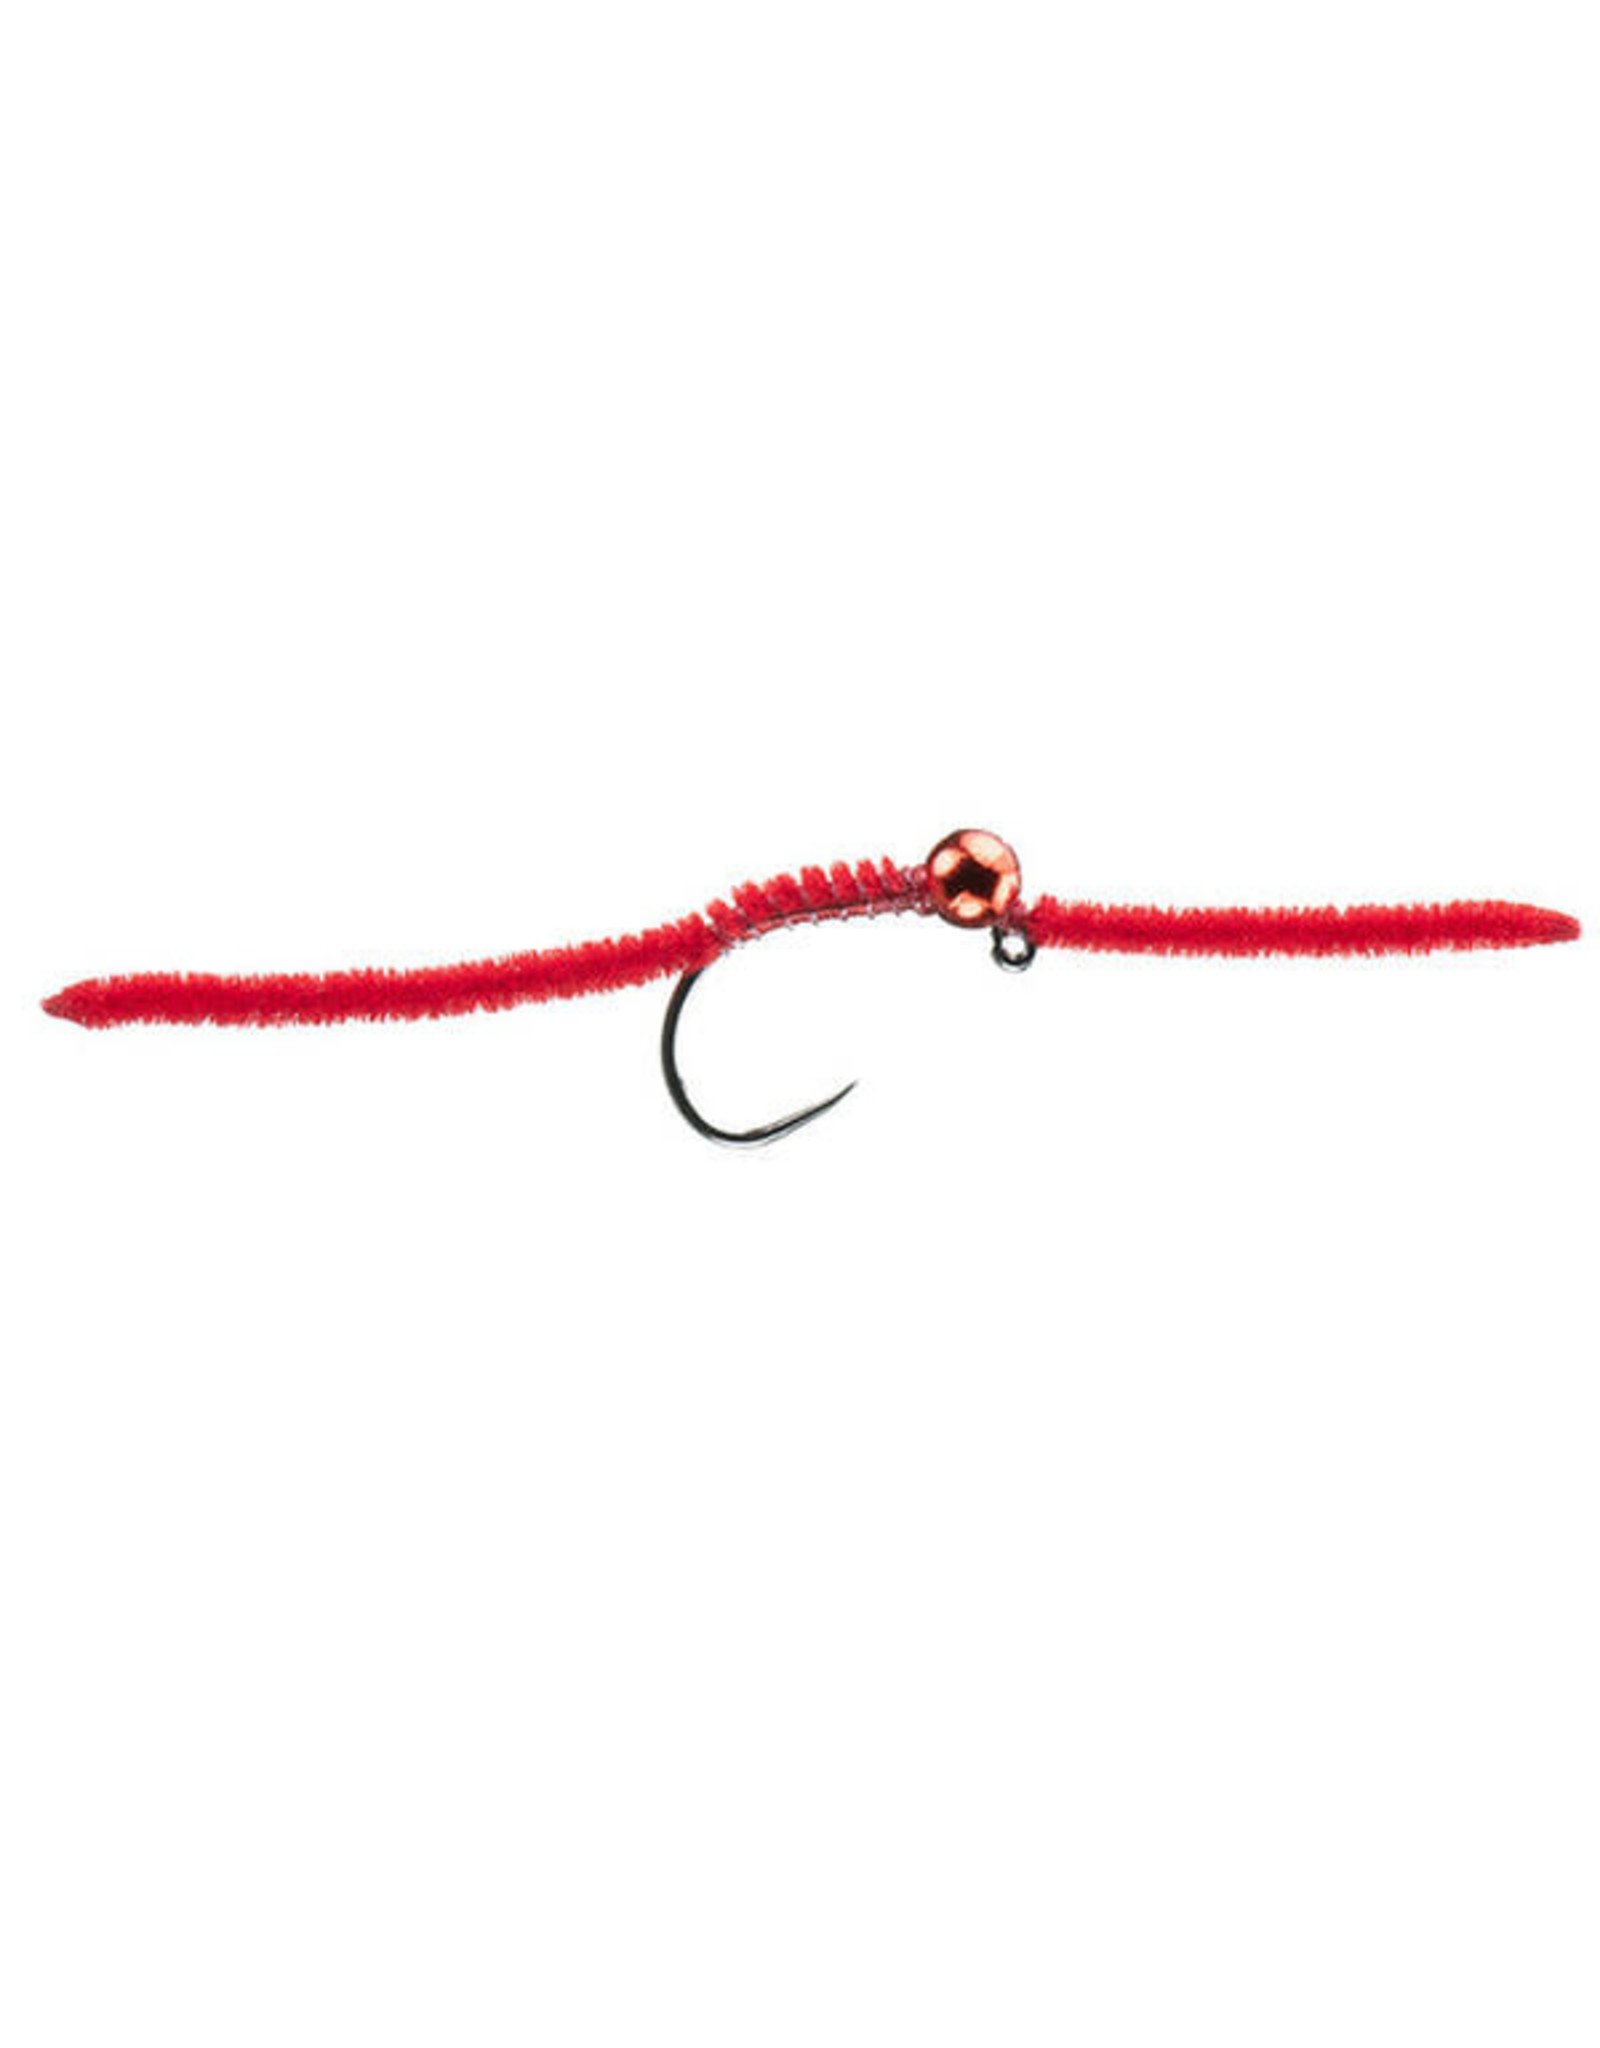 The Worm - Red – Fly Fish Food